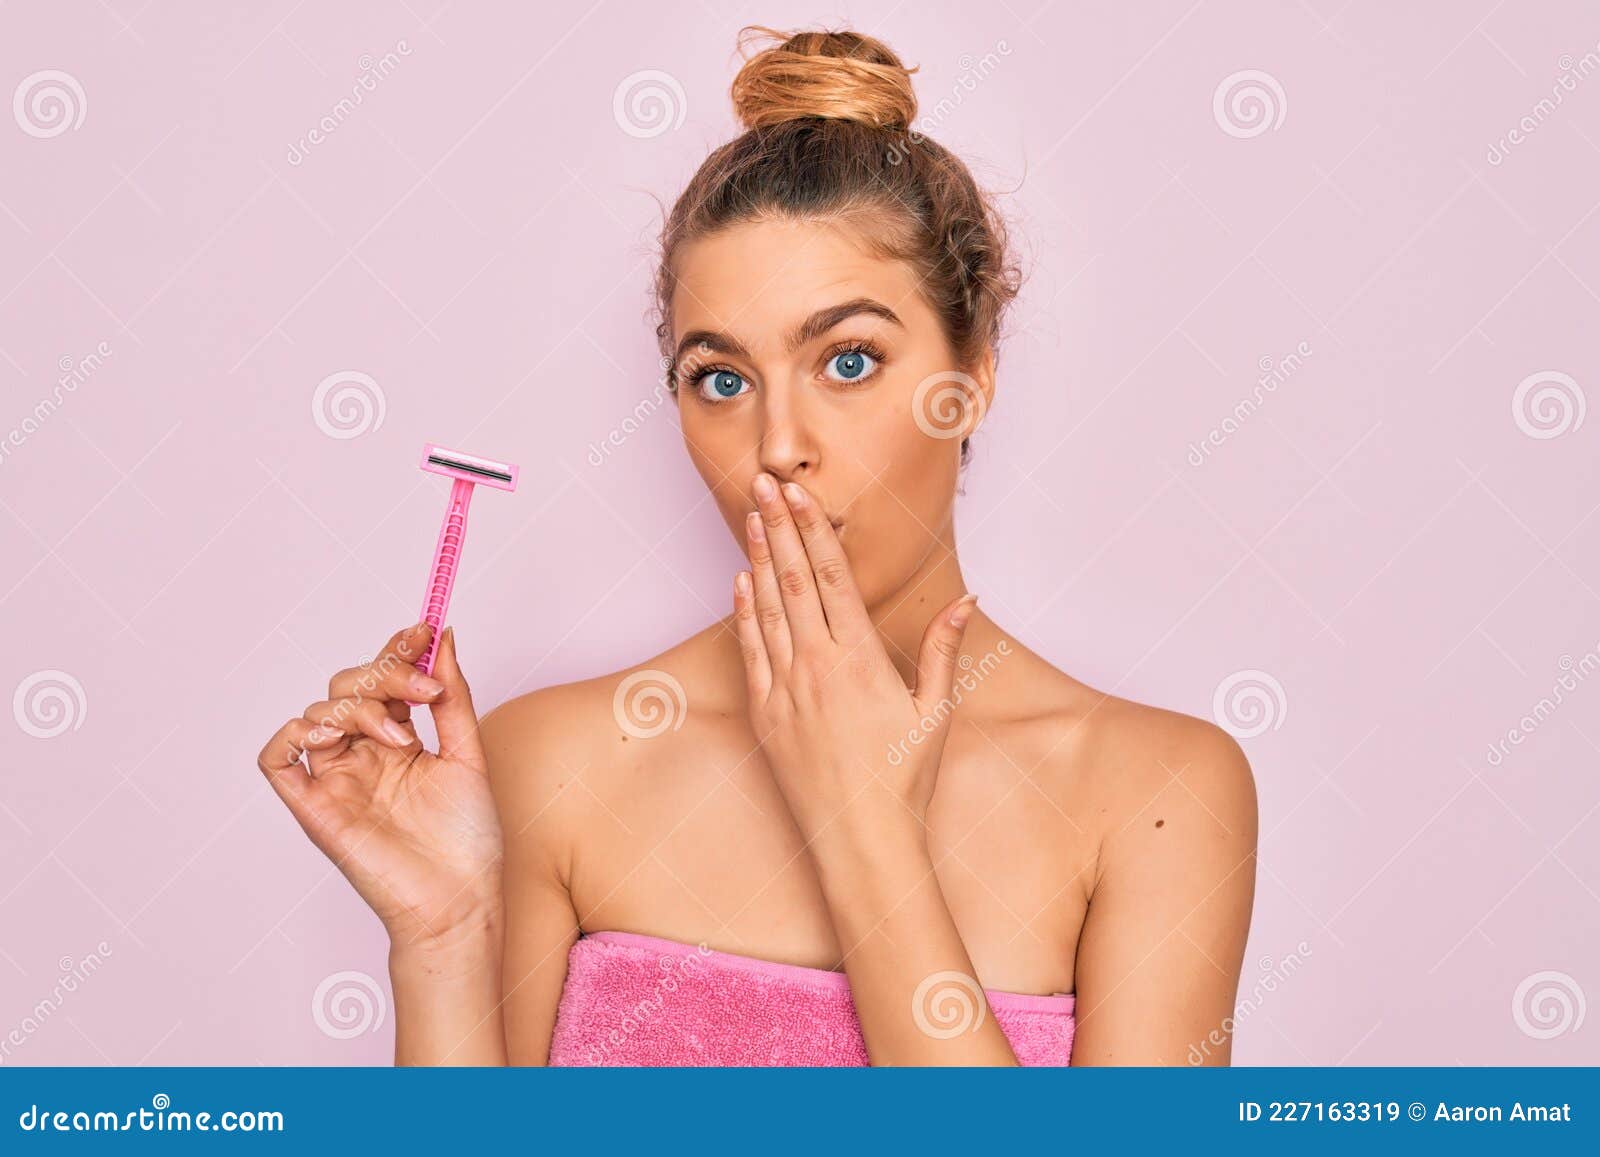 beautiful woman with blue eyes wearing towel shower after bath holding depilation razon cover mouth with hand shocked with shame